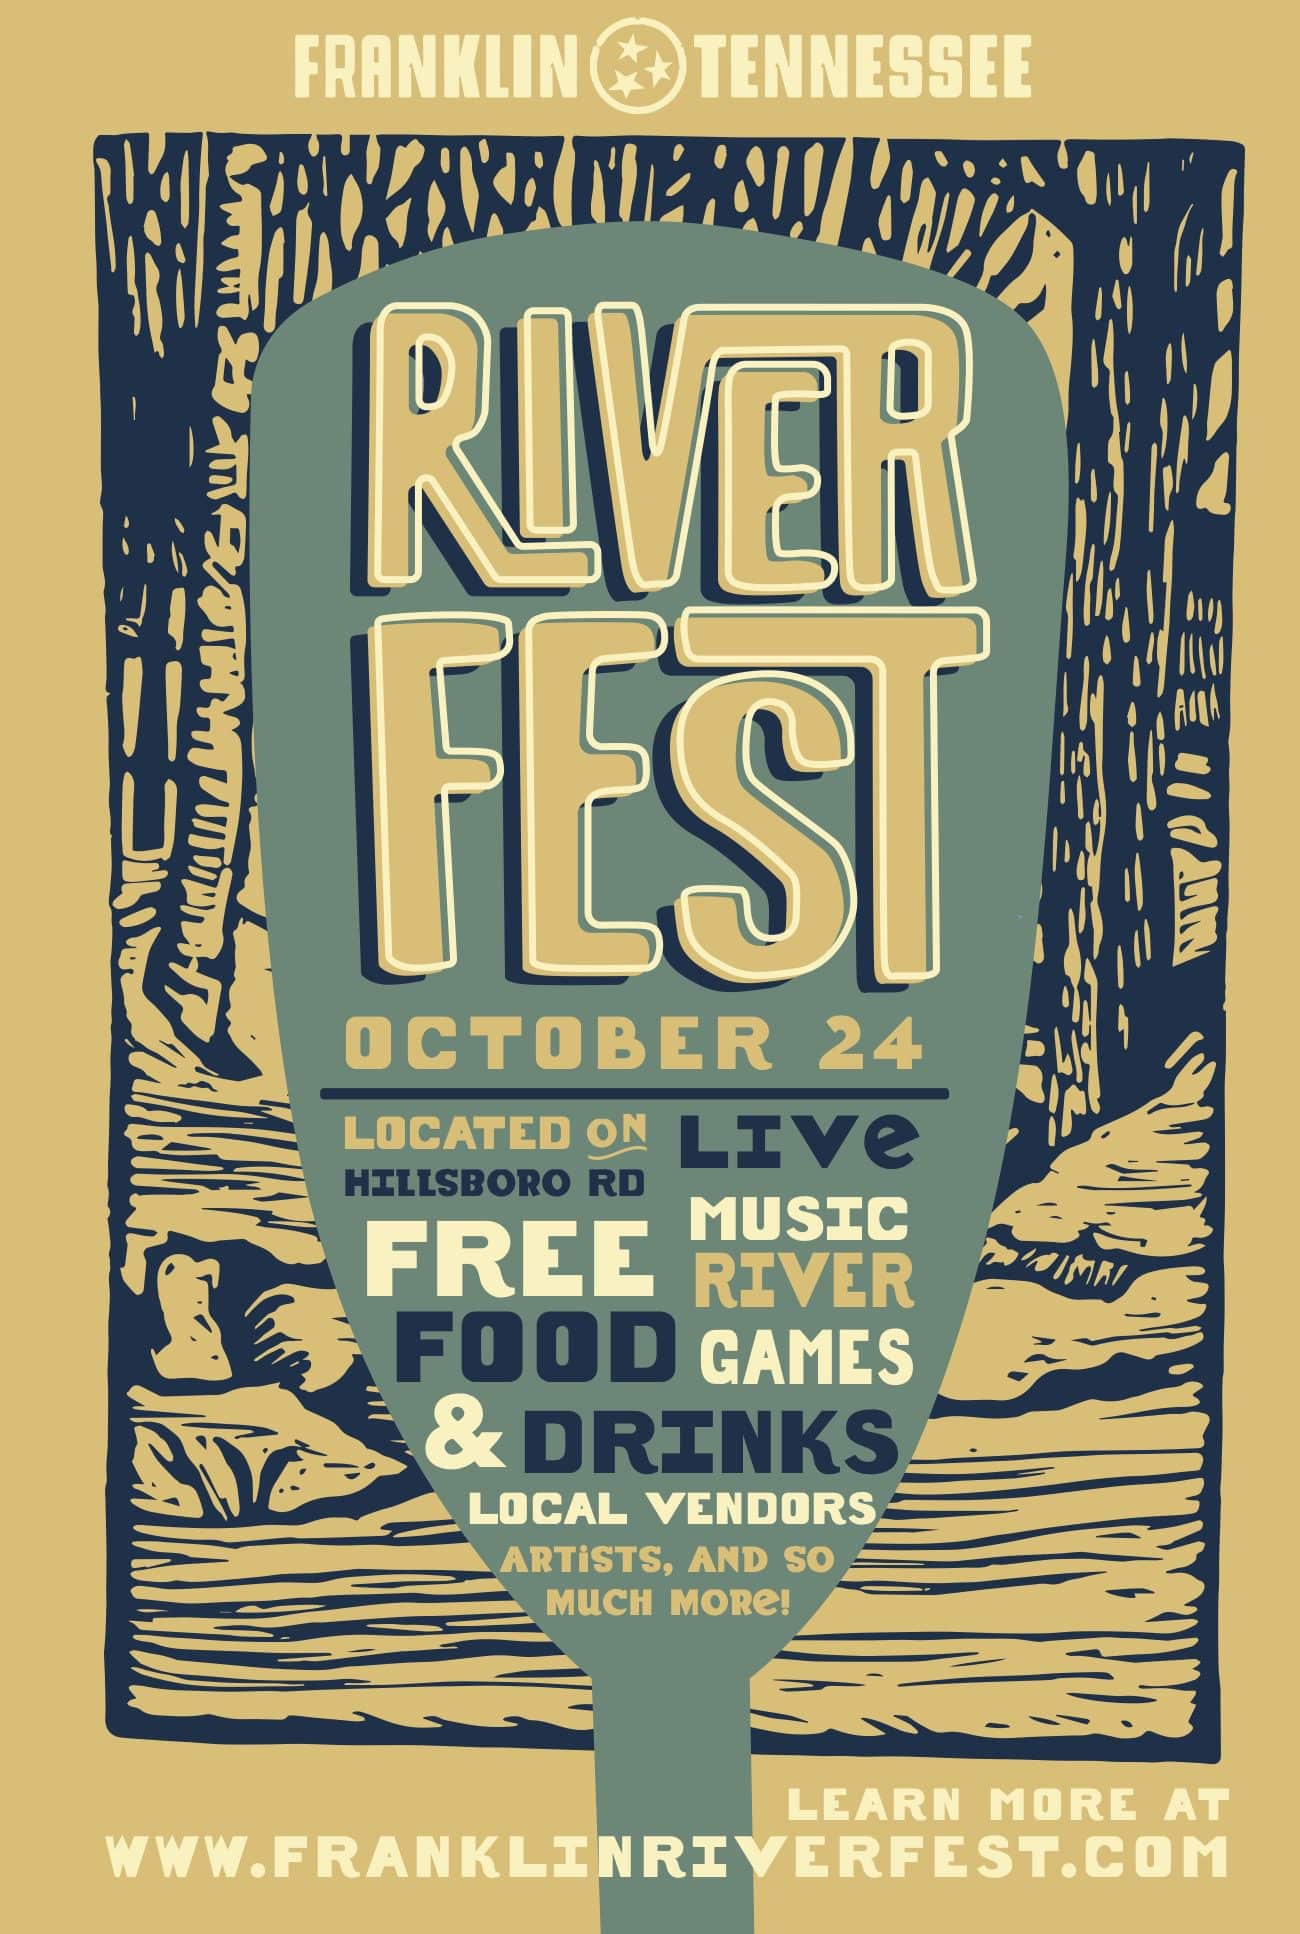 Franklin River Fest is a festival in Franklin, Tenn with live music, kids activities, delicious food, inflatables, river activities, and more.